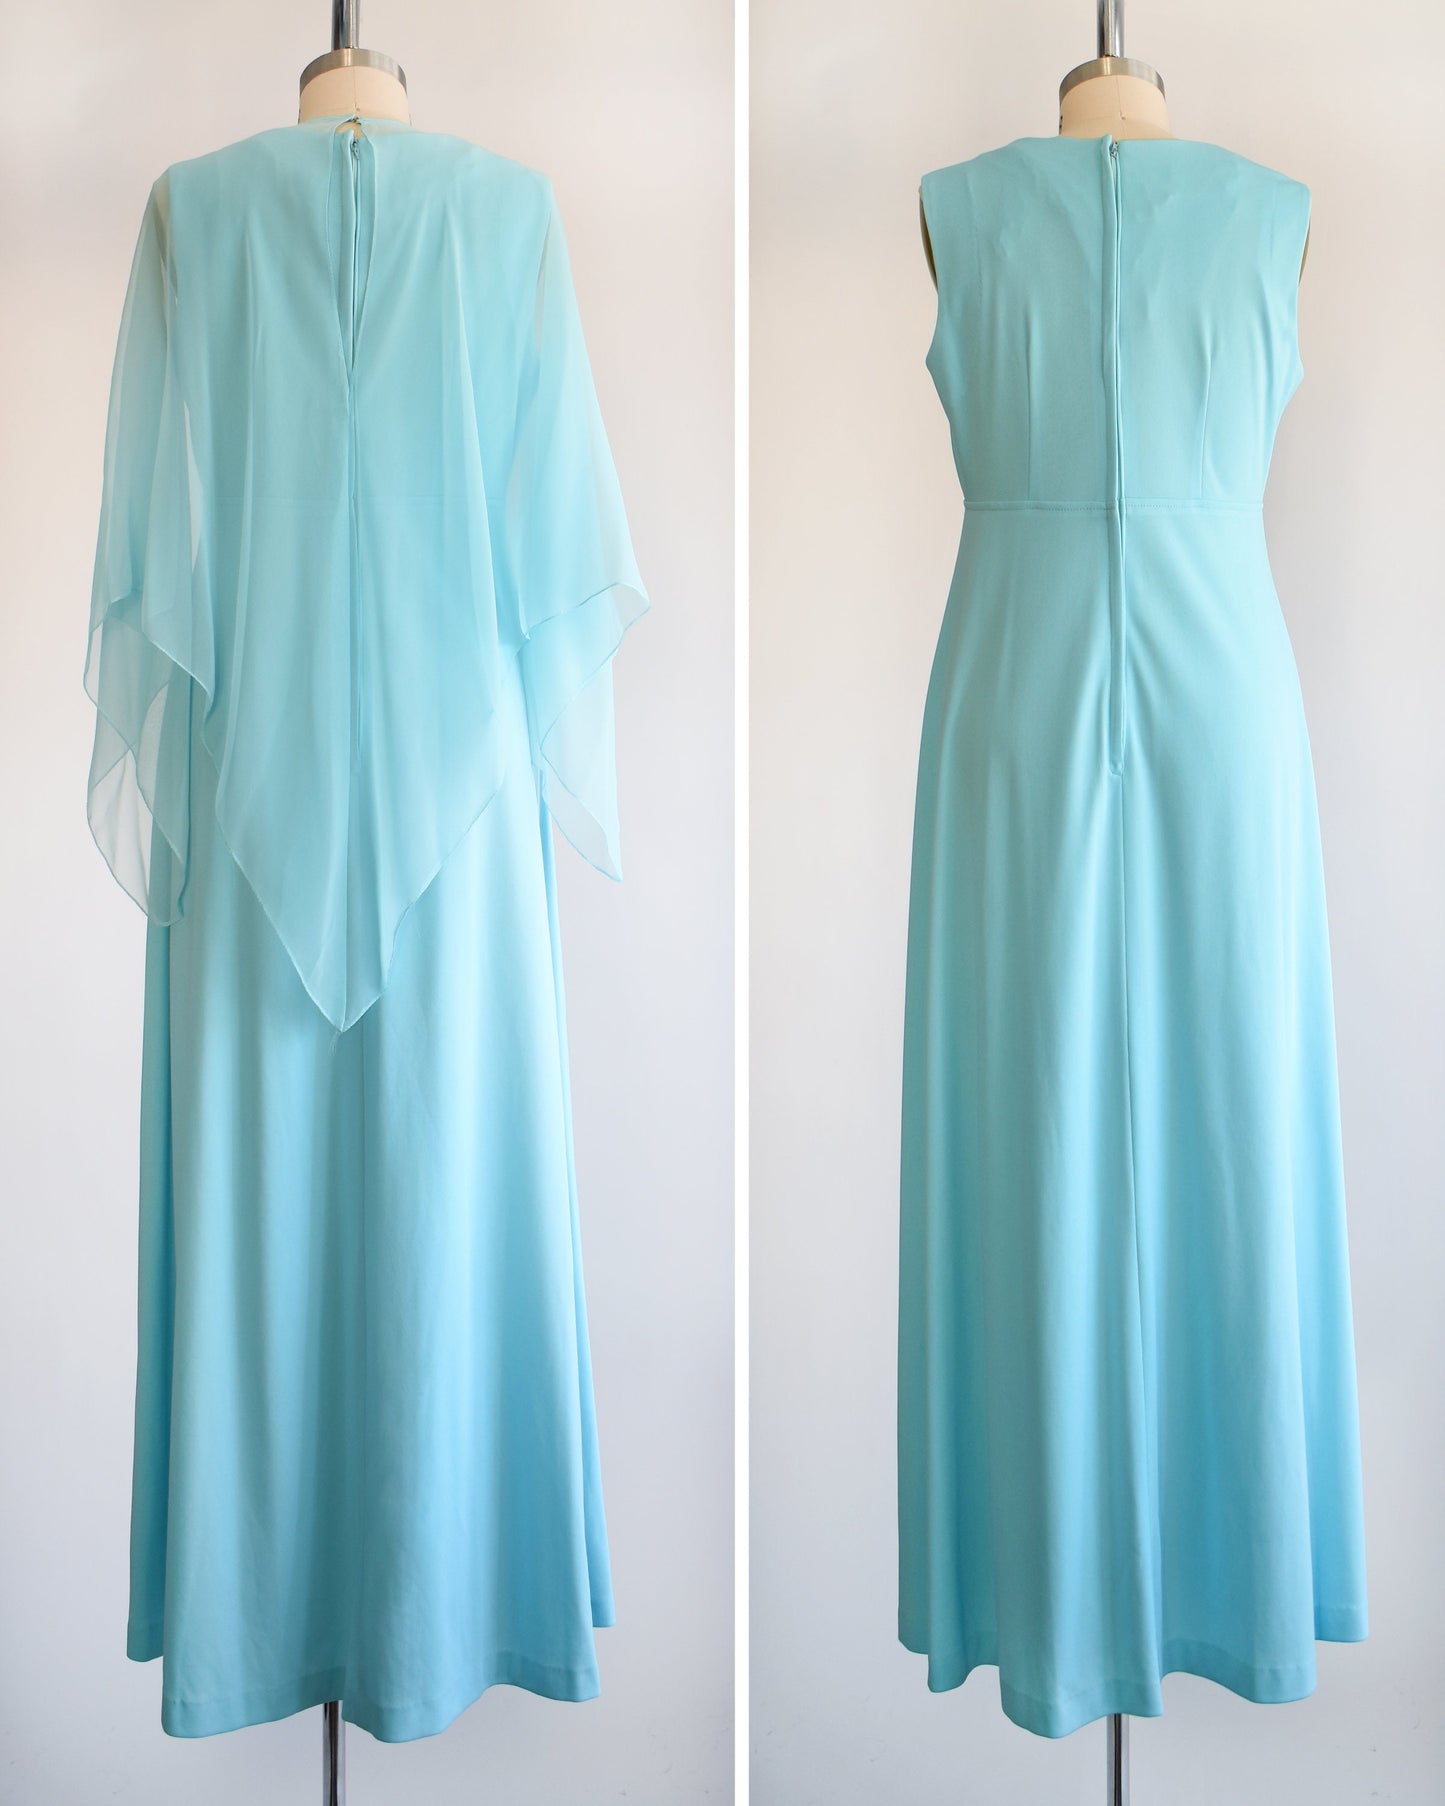 Back view of a vintage 70s blue maxi dress with matching semi-sheer blue cape overlay. The right photo shows the dress without the cape. The dress is on a dress form.